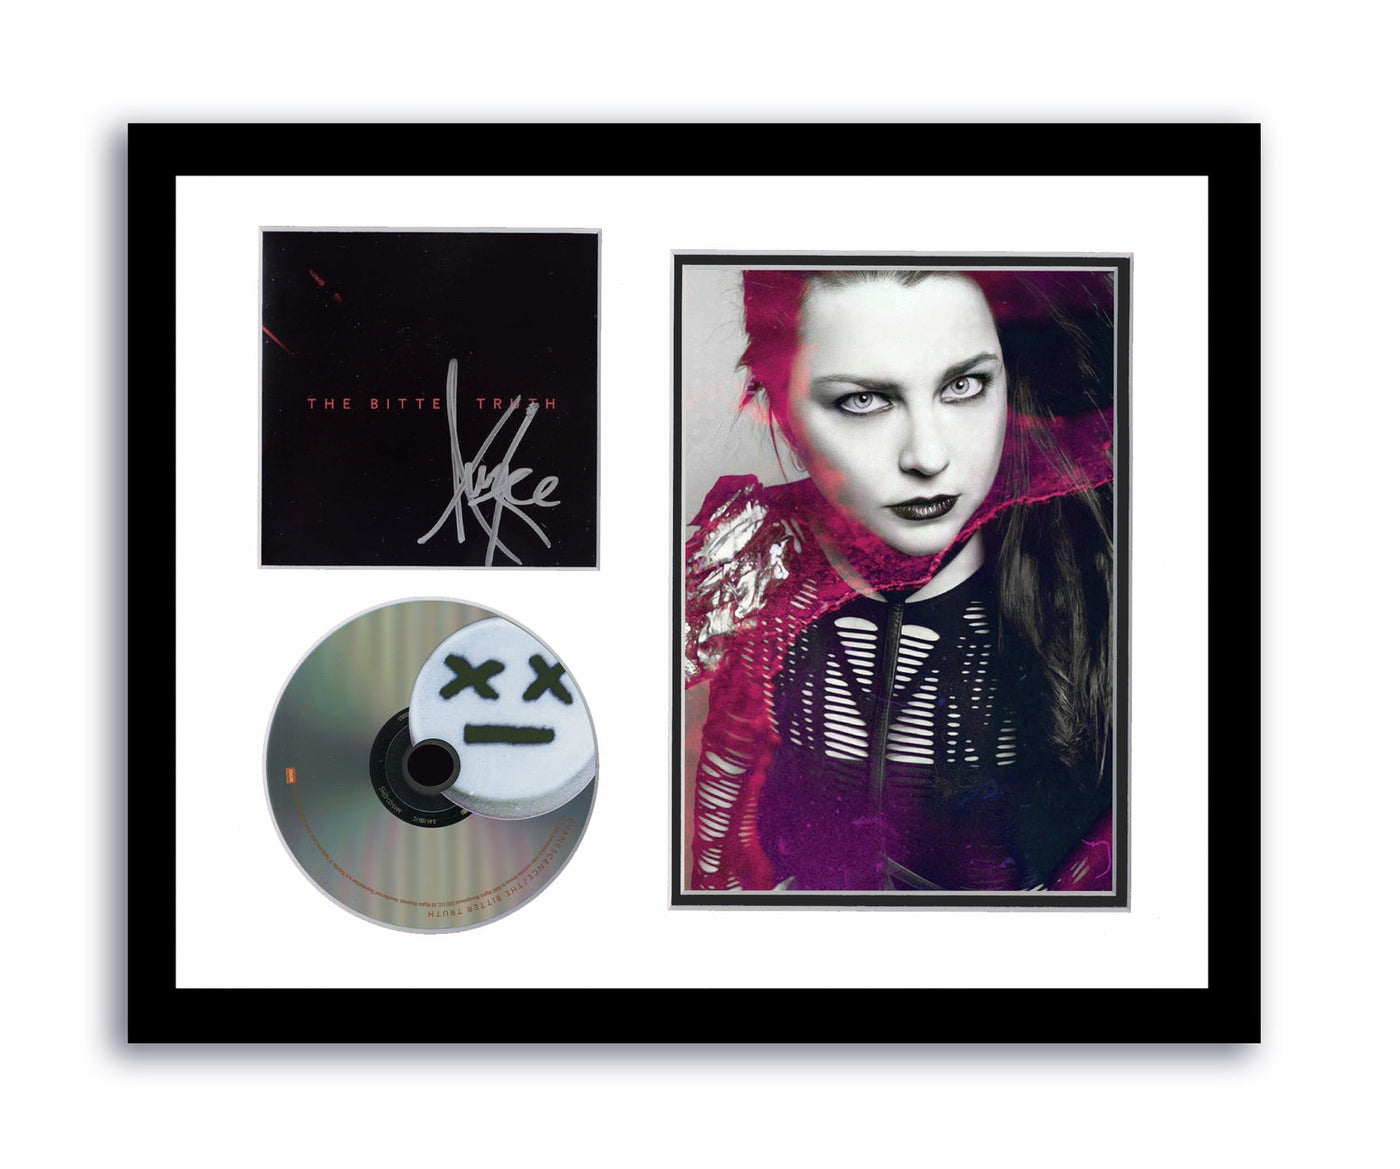 Evanescence Amy Lee Autographed 11x14 Custom Framed CD Photo Bitter Truth Signed ACOA 17